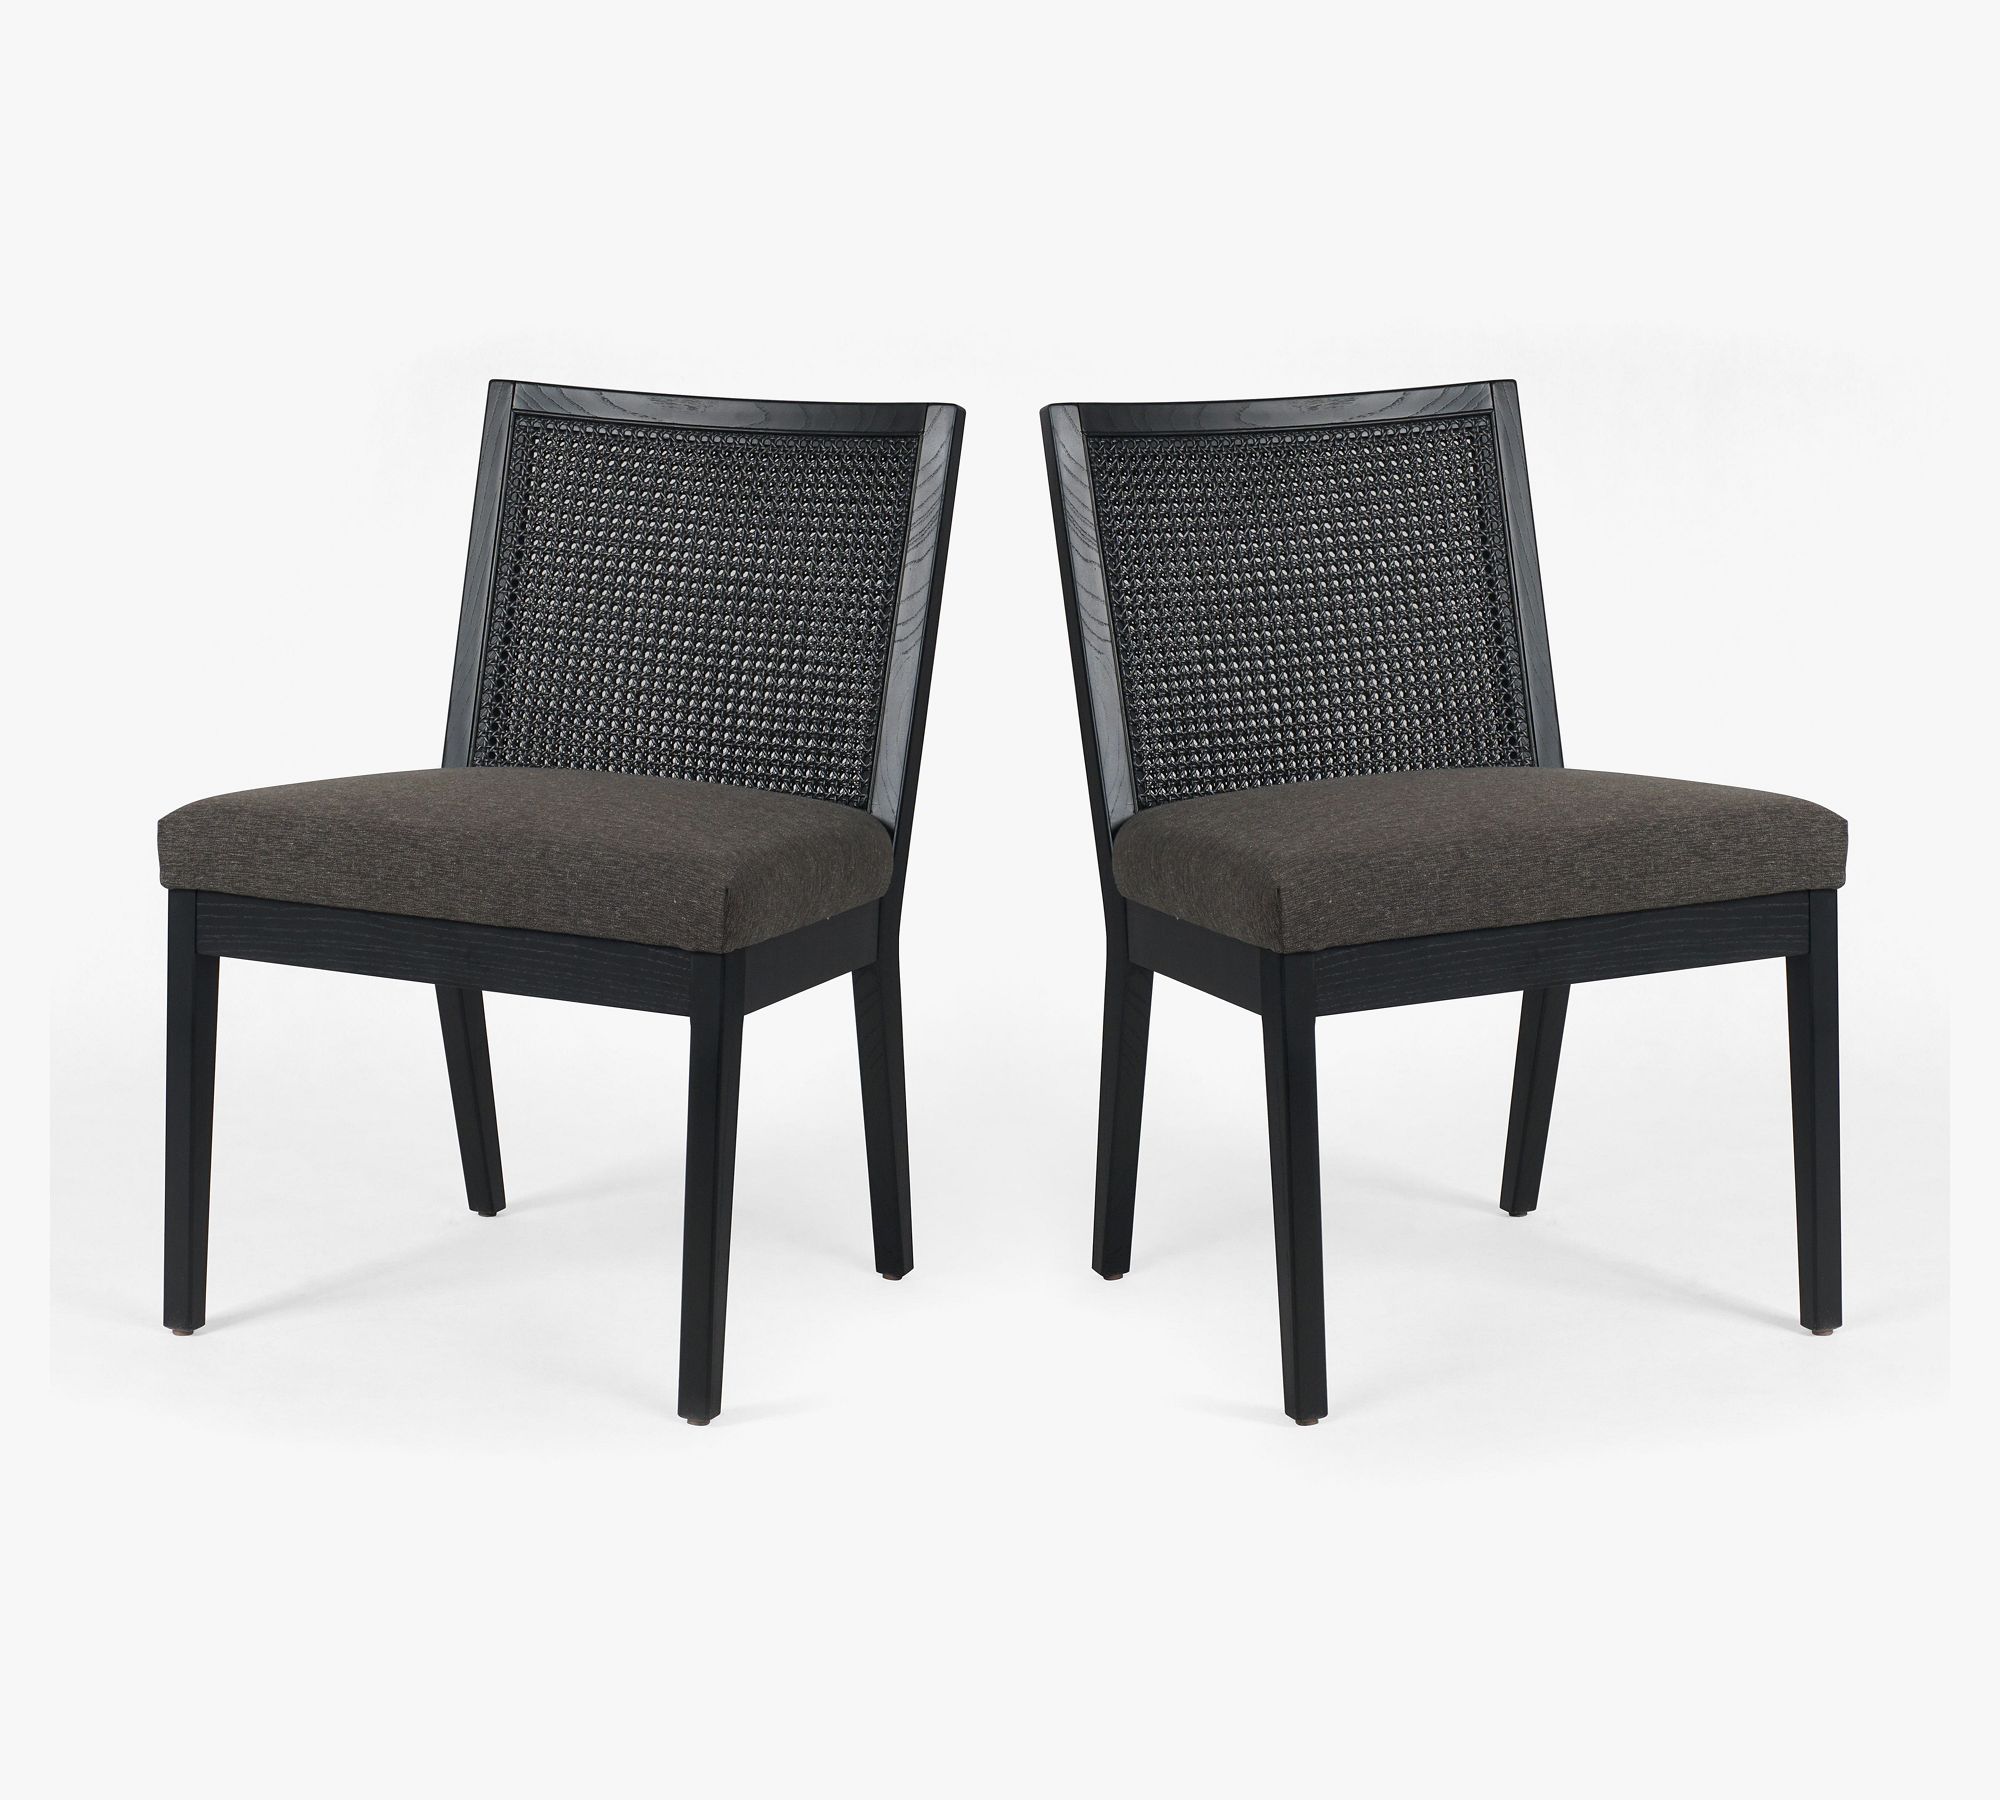 Lisbon Upholstered Cane Dining Chairs - Set of 2